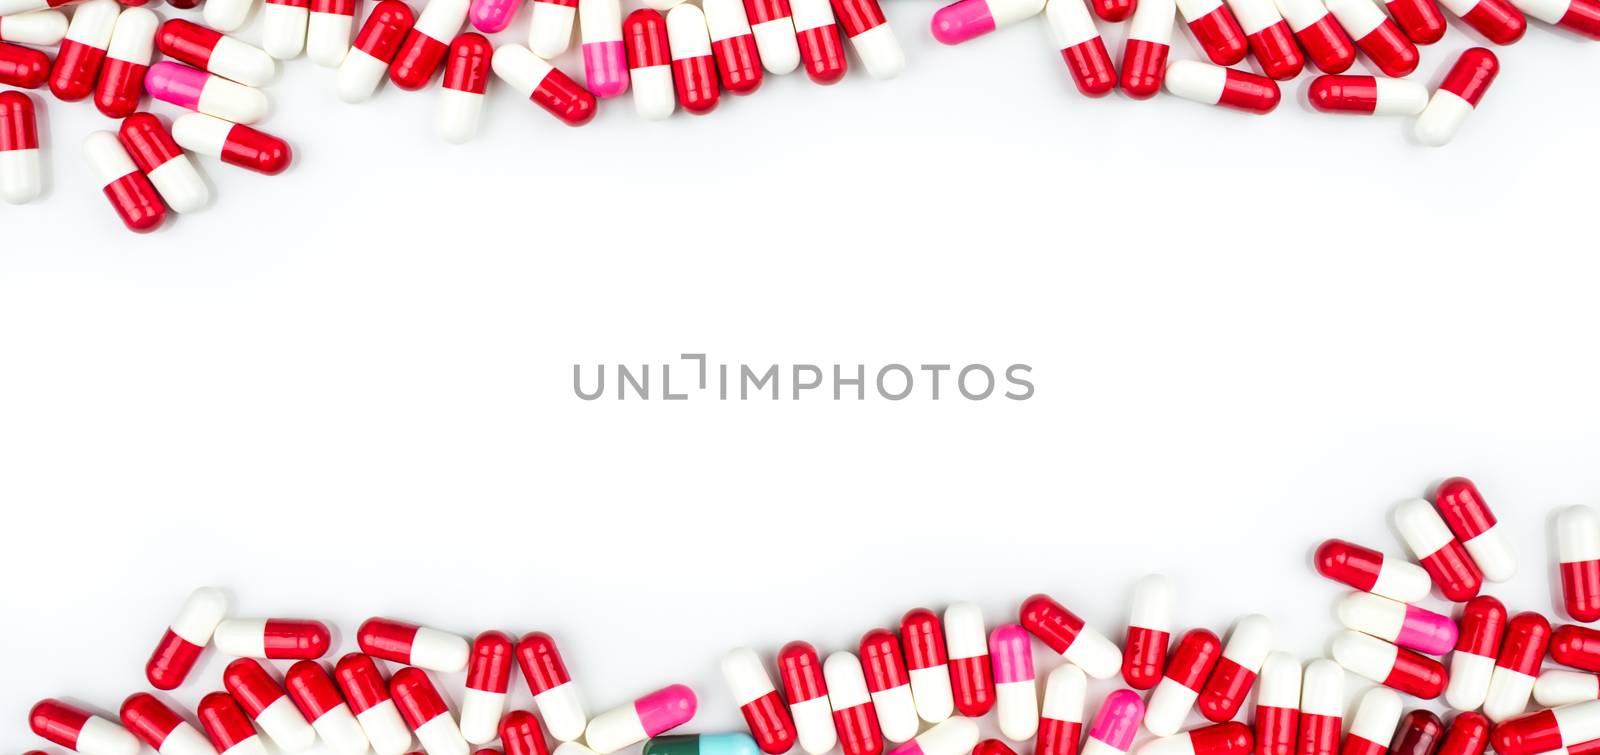 Colorful of antibiotic capsules pills isolated on white background with copy space for text. Drug resistance concept. Antibiotics drug use with reasonable and global healthcare concept. Pharmaceutical industry. Pharmacy background. by Fahroni